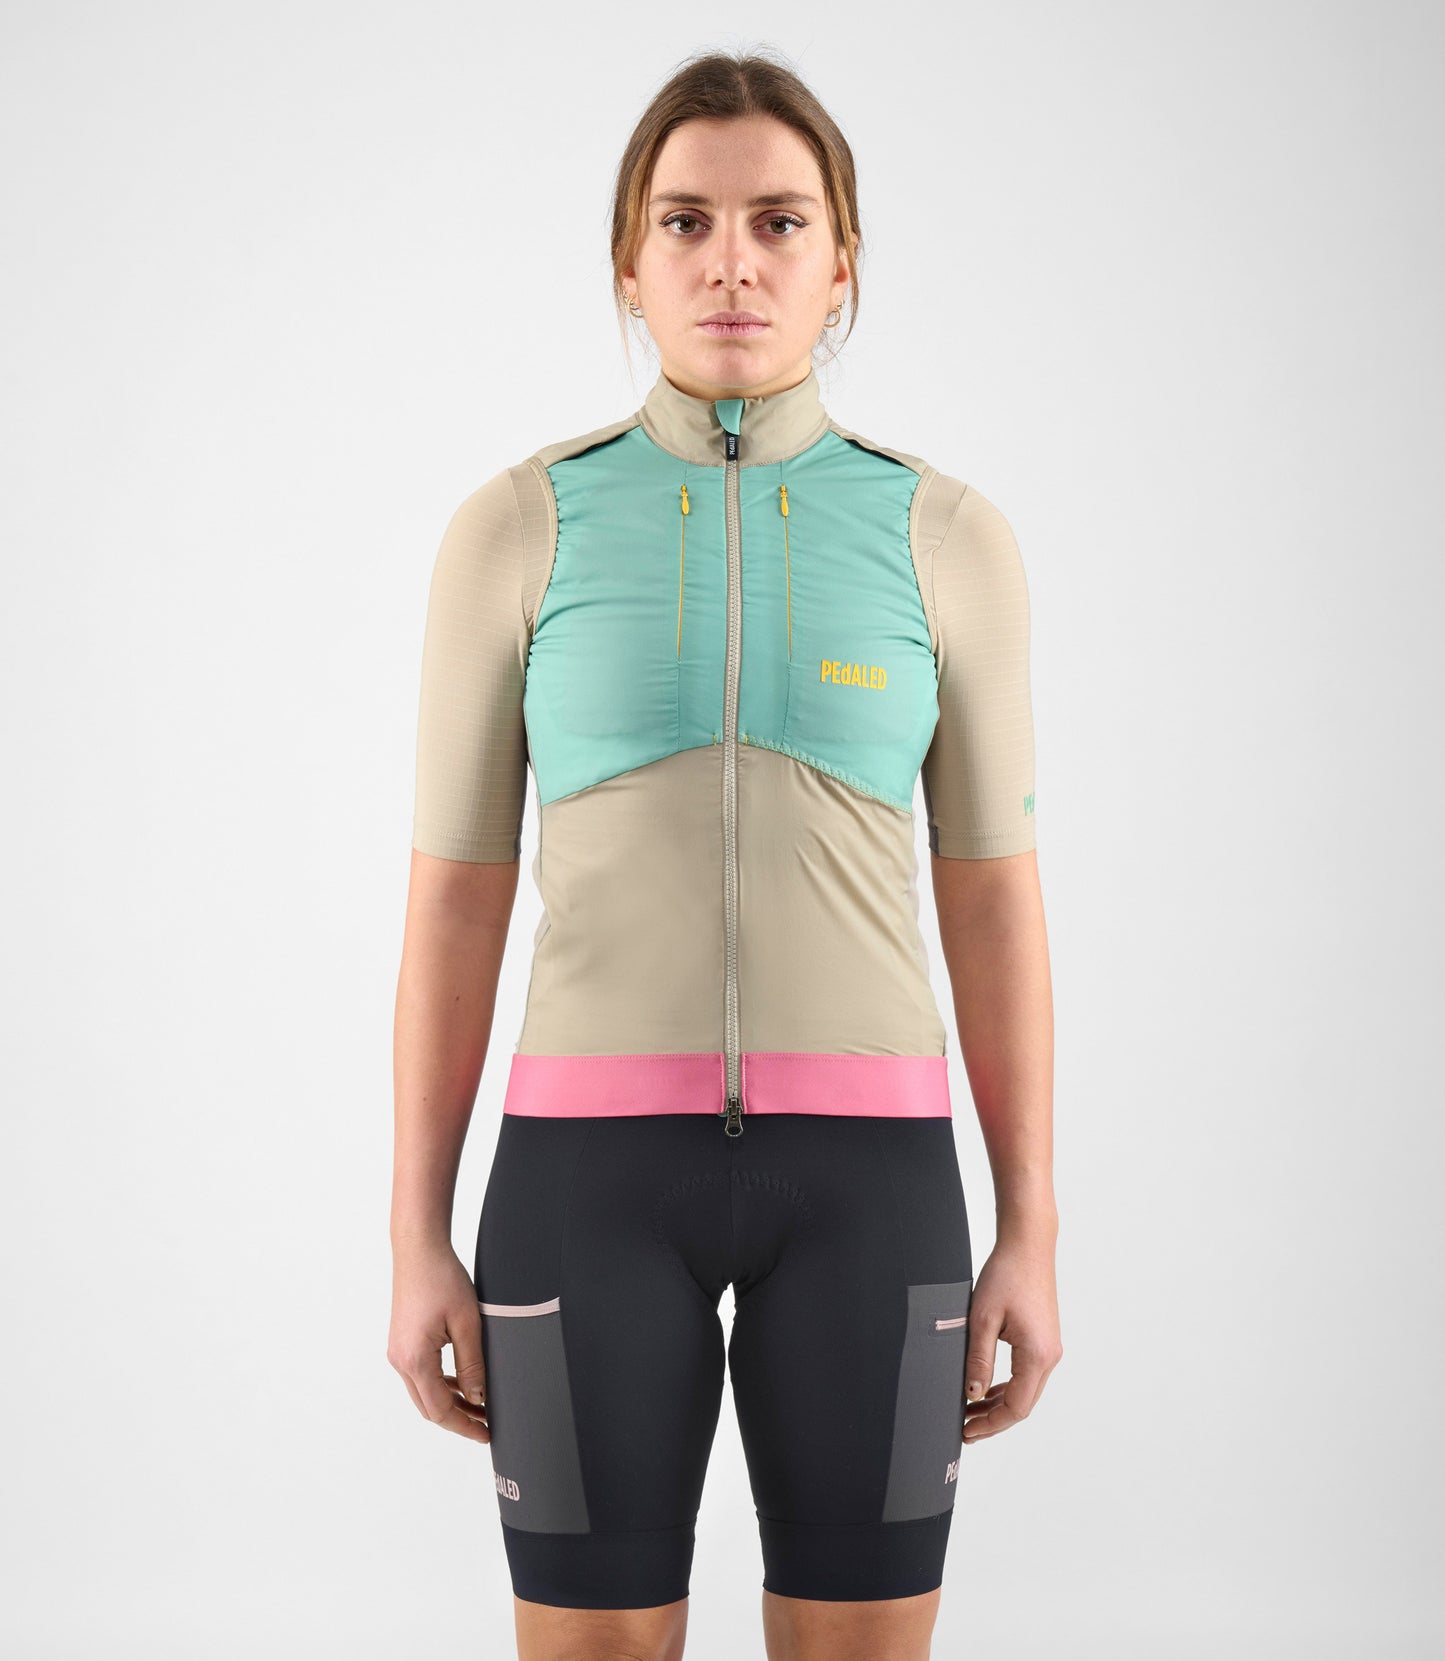 W4SVEOD37PE_3_women cycling insulated vest light green odyssey total body front pedaled